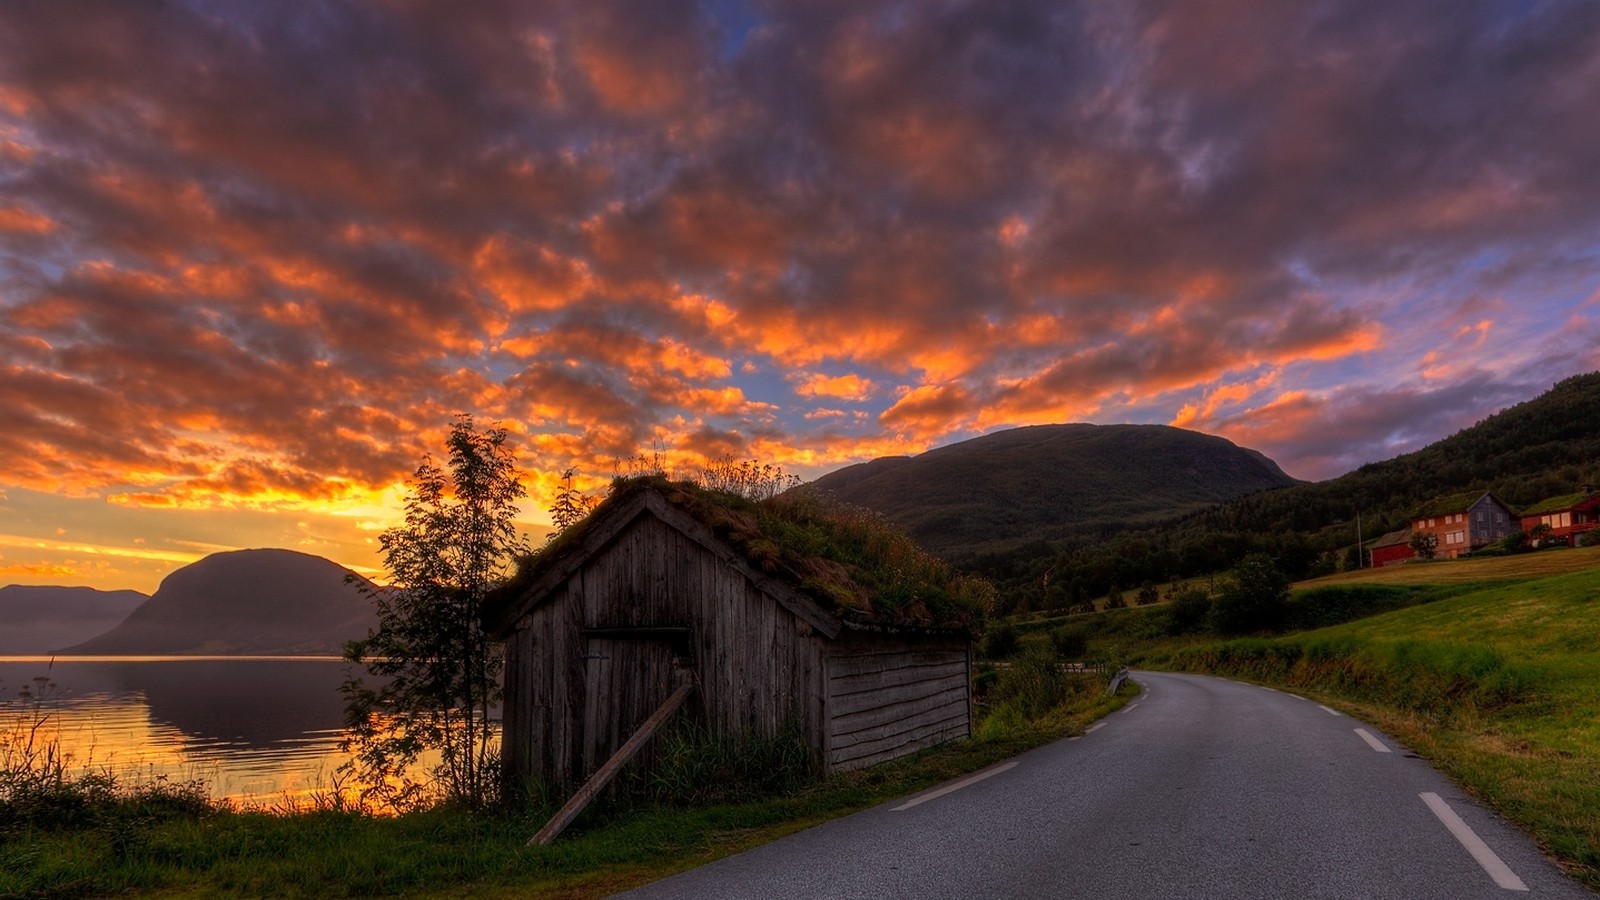 General 1600x900 road hut sky clouds grass mountains Norway summer nature lake landscape orange sky sunlight outdoors nordic landscapes